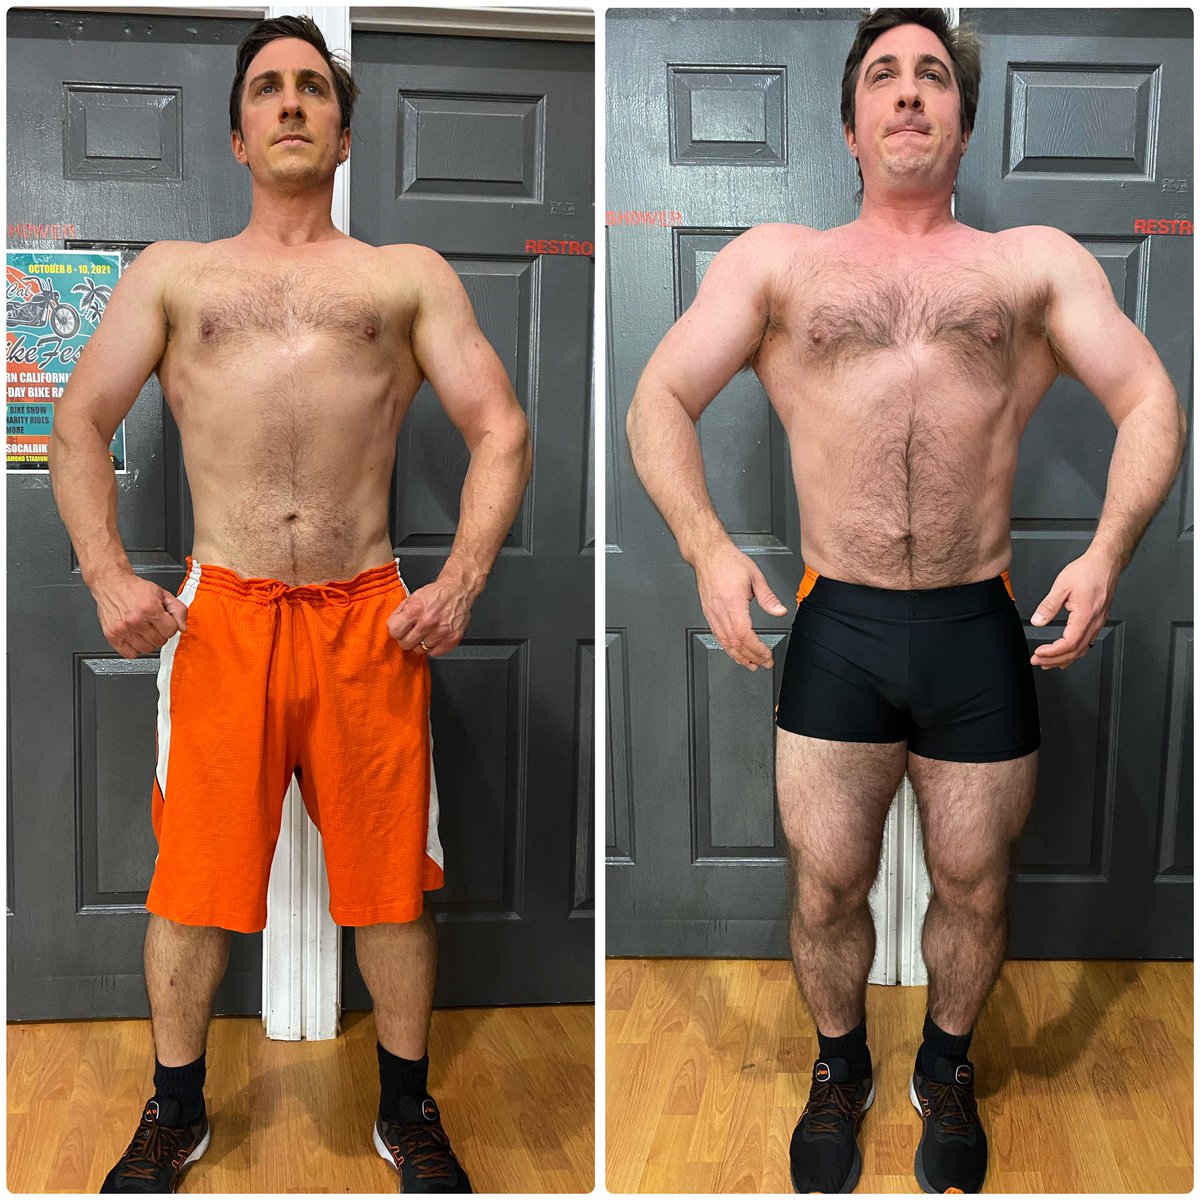 Exactly 8 months on my ‘Accountability Program’ and 50 lbs of #weightgain with my #personaltraining client Marc. He’s been fully dedicated to #buildingmuscle this #bulkseason while the custom #mealplan consistently increased!

#transformationtuesday #andreasathletes #bodybuilding